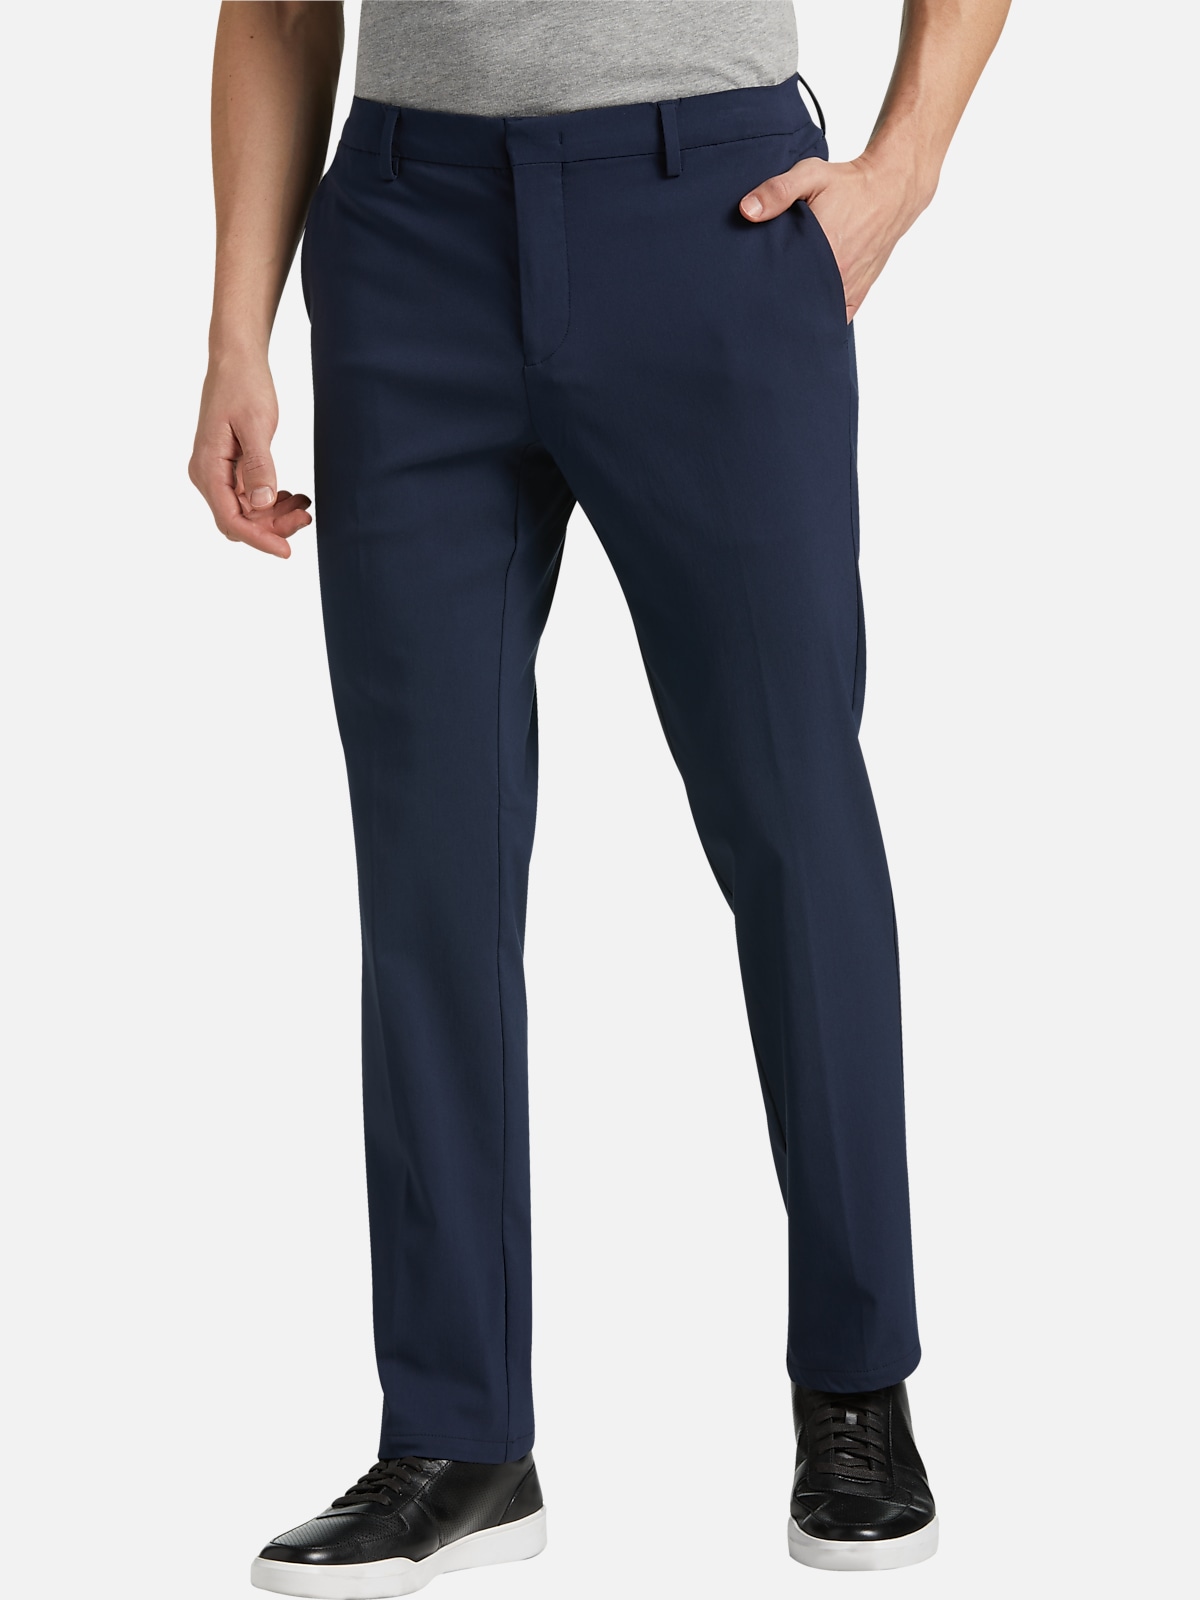 Awearness Kenneth Cole Slim Fit Performance Pants | All Clearance $39. ...